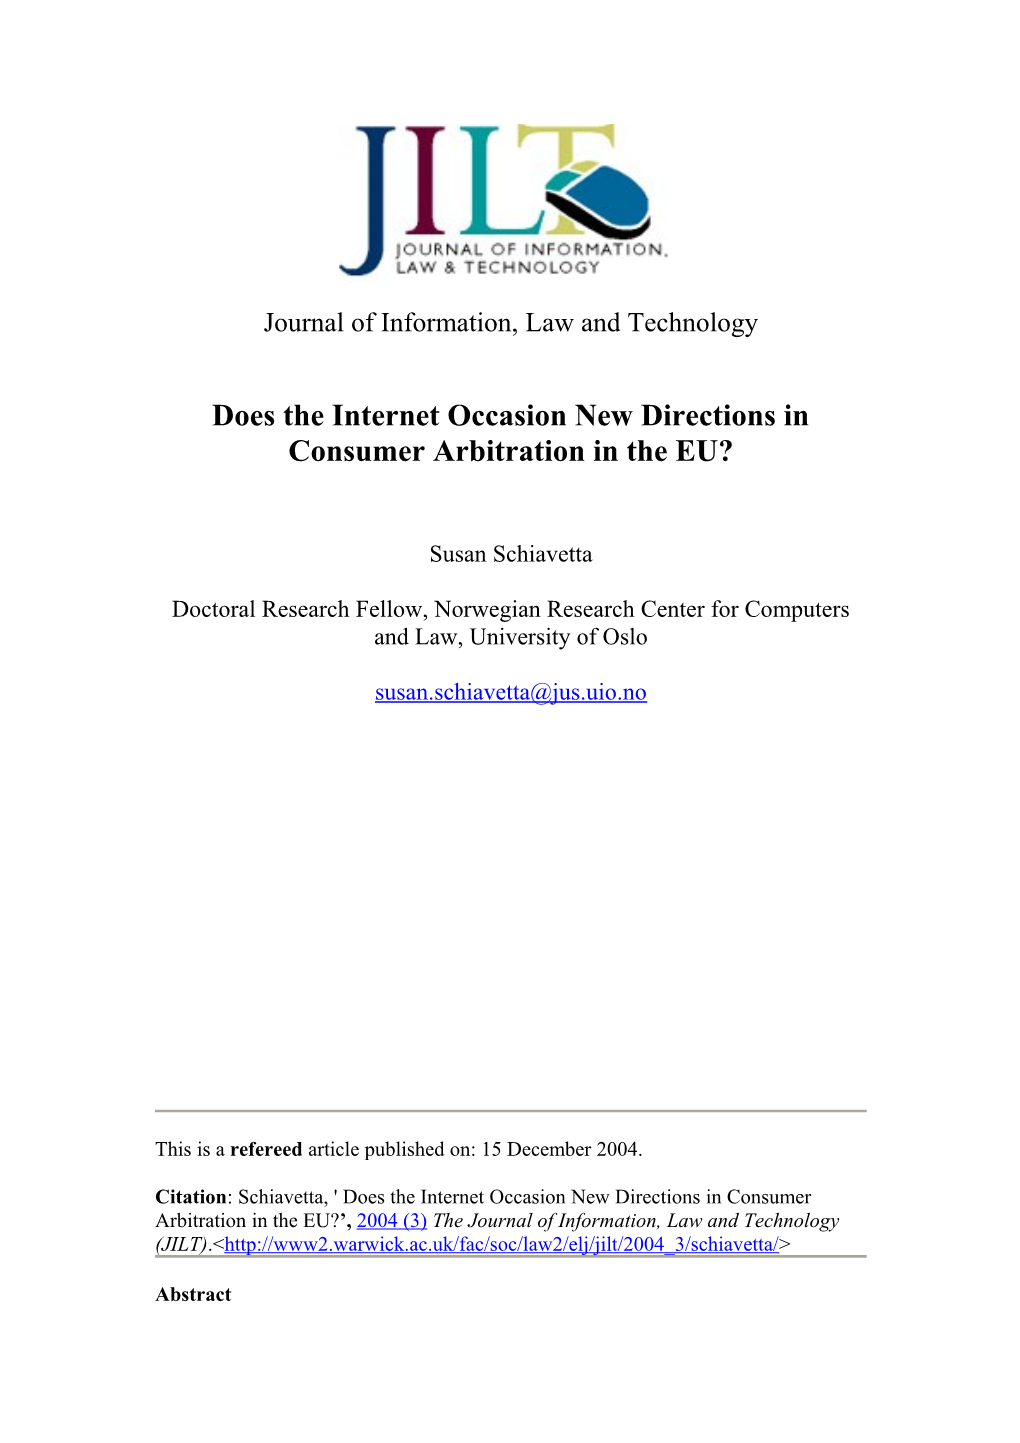 Does the Internet Occasion New Directions in Consumer Arbitration in the EU?